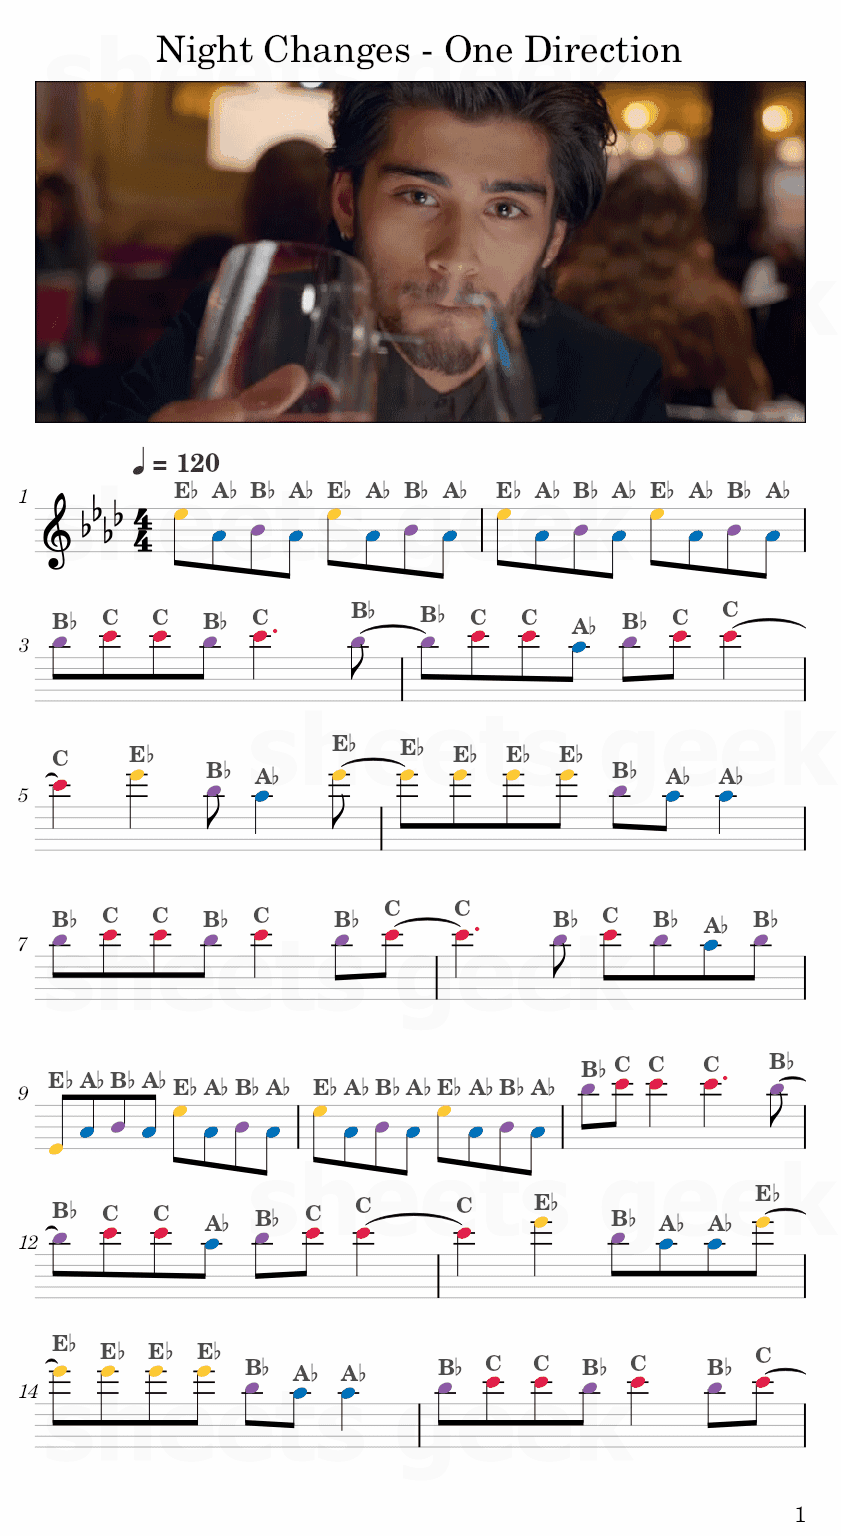 Night Changes - One Direction Easy Sheet Music Free for piano, keyboard, flute, violin, sax, cello page 1